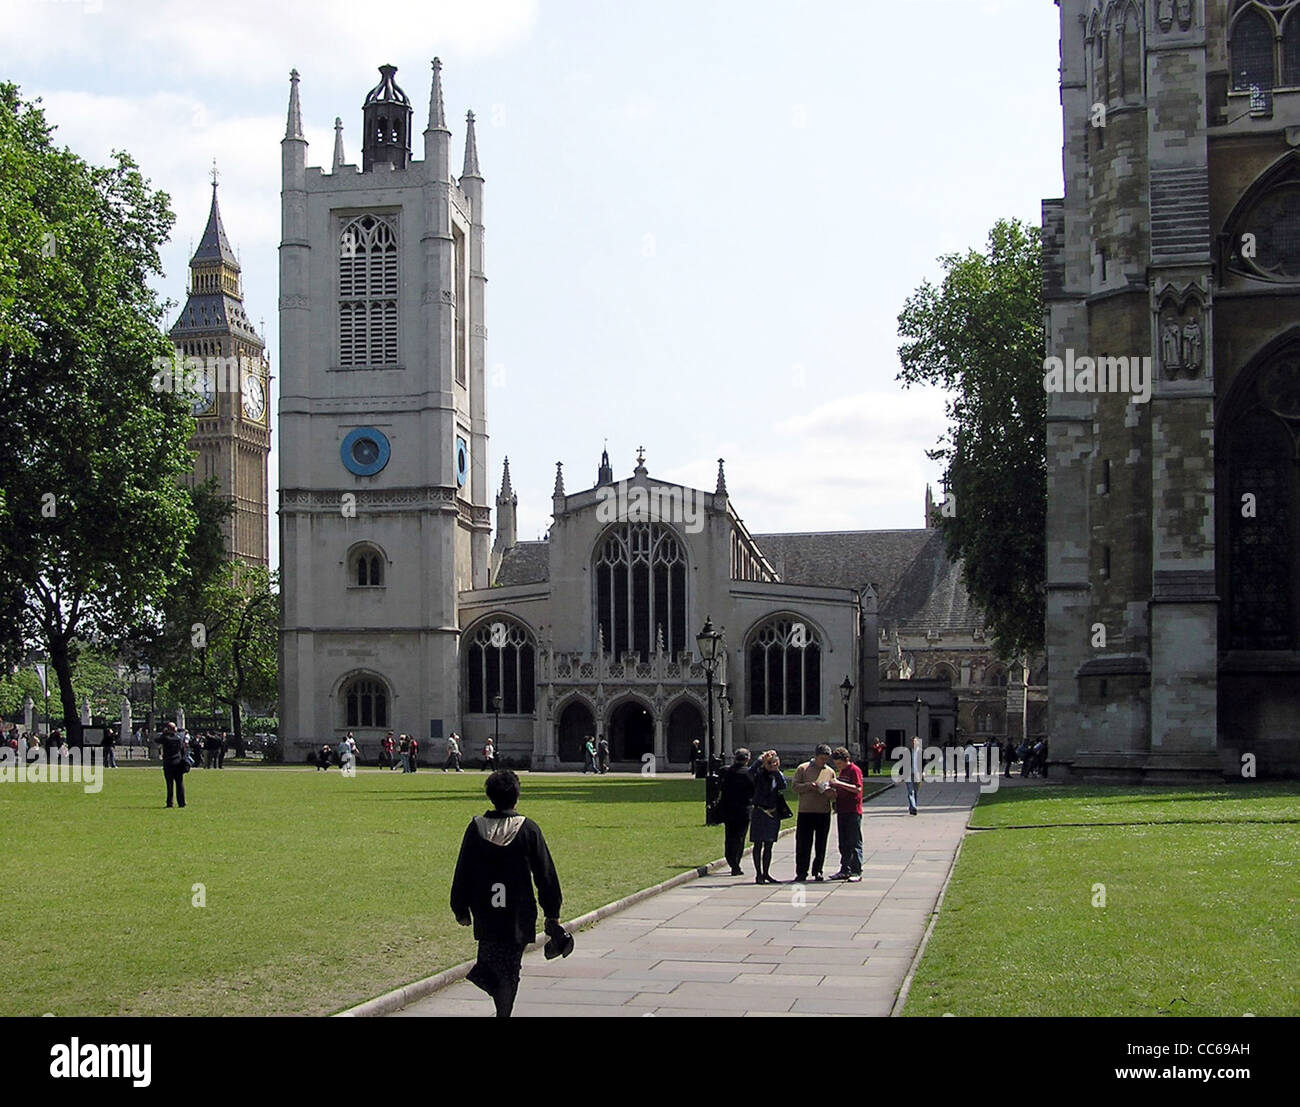 St. Margaret’s Church, Westminster, London, England. To the left is the Clock Tower of Big Ben, to the right is a corner of West Stock Photo